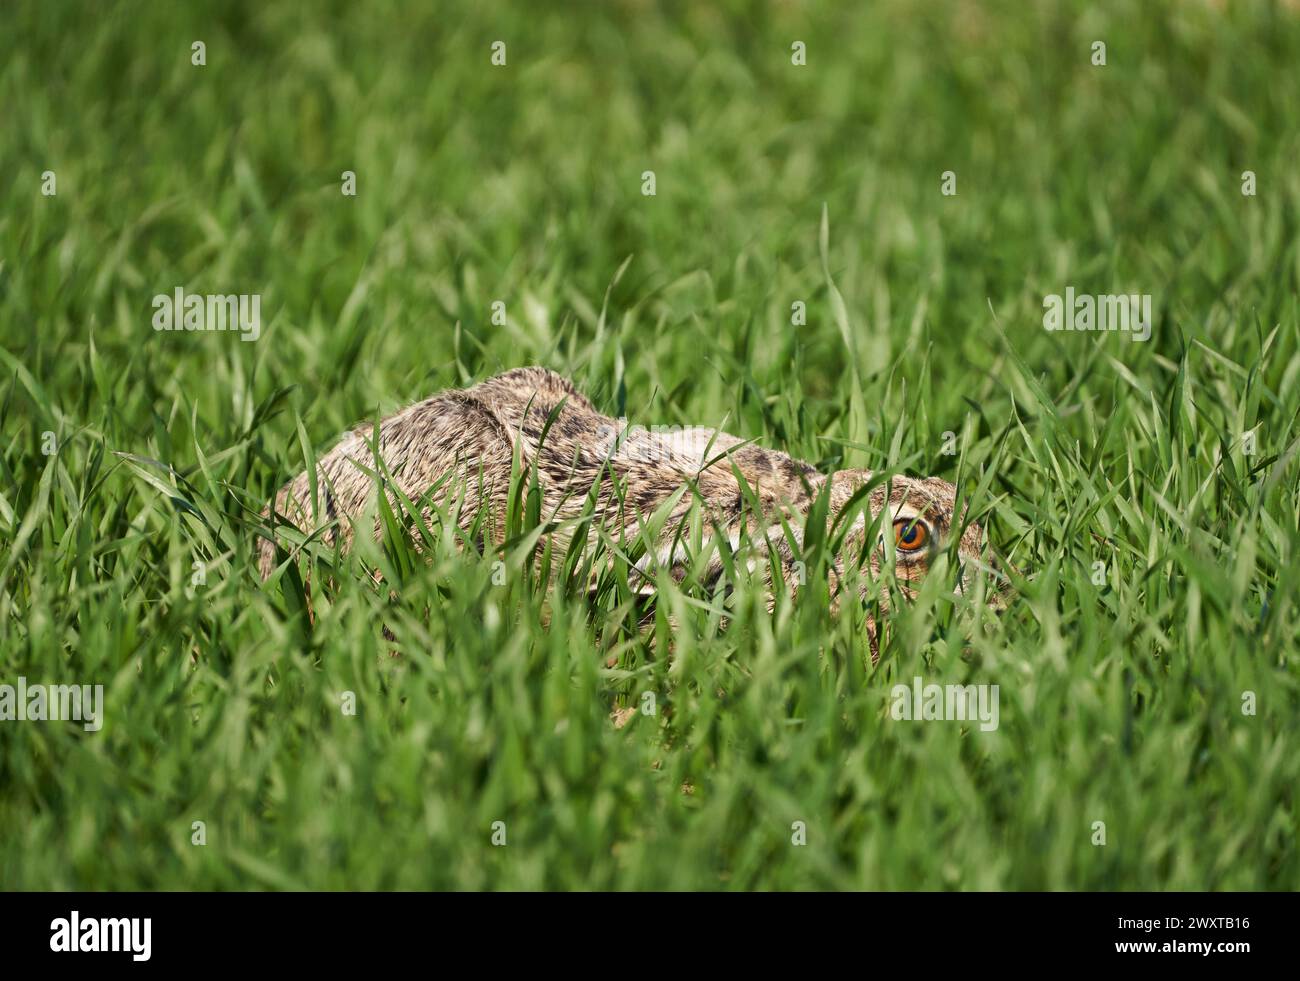 Adult hare hiding in a wheat field, crouched to the ground, ready to run Stock Photo